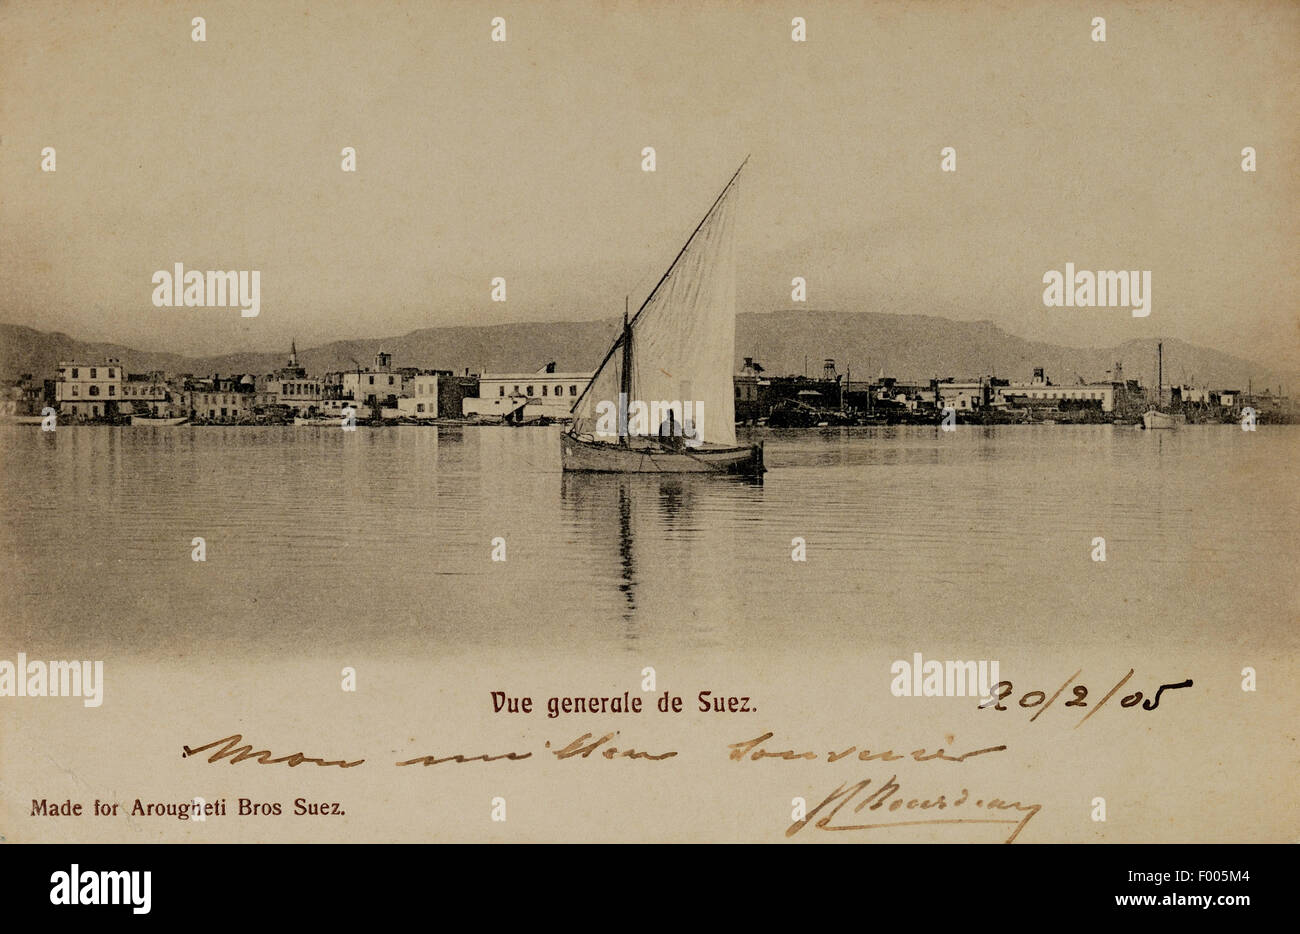 Suez, Egypt - 1905 - An old postcard of the harbor in Suez, the city at the southern end of the Suez Canal. COPYRIGHT PHOTOGRAPHIC COLLECTION OF BARRY IVERSON ALL RIGHTS RESERVED Stock Photo